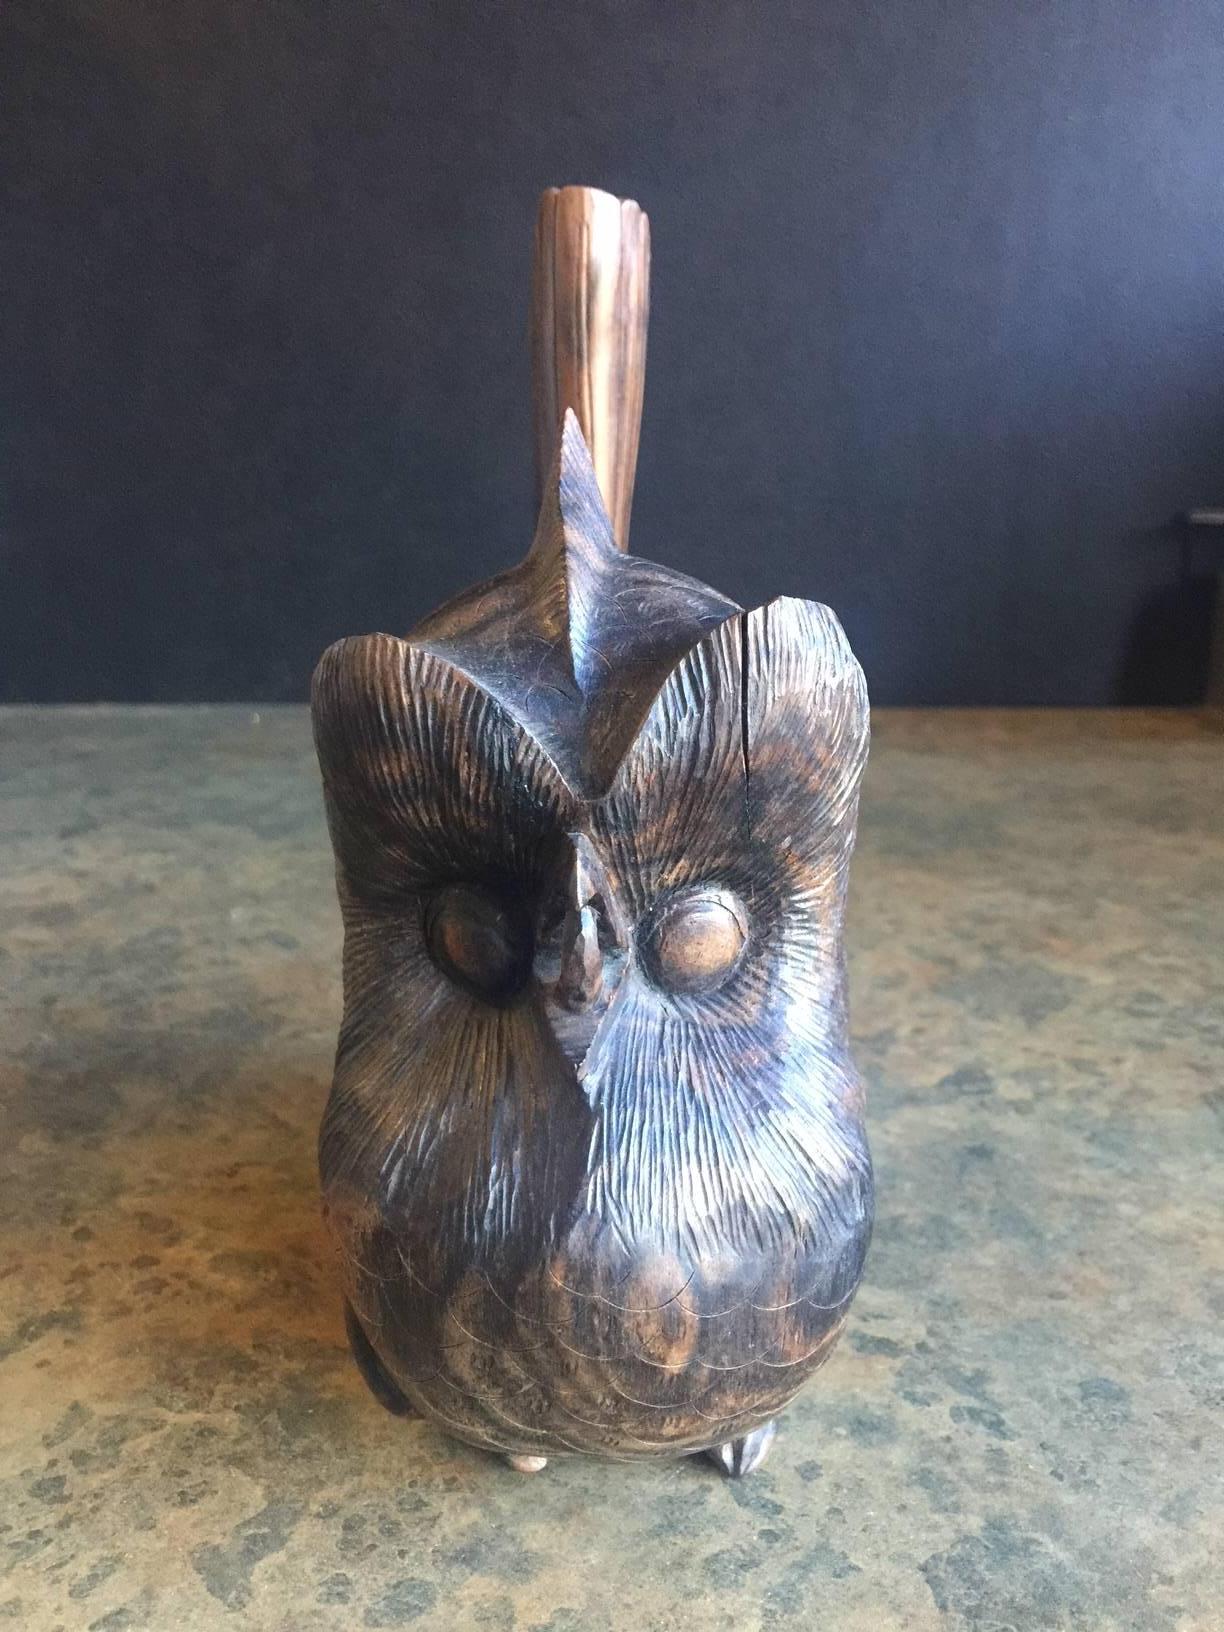 A very cool mid-century hand carved owl sculpture made of zebra wood.  The piece has tremendous detail carved around the entire sculpture.